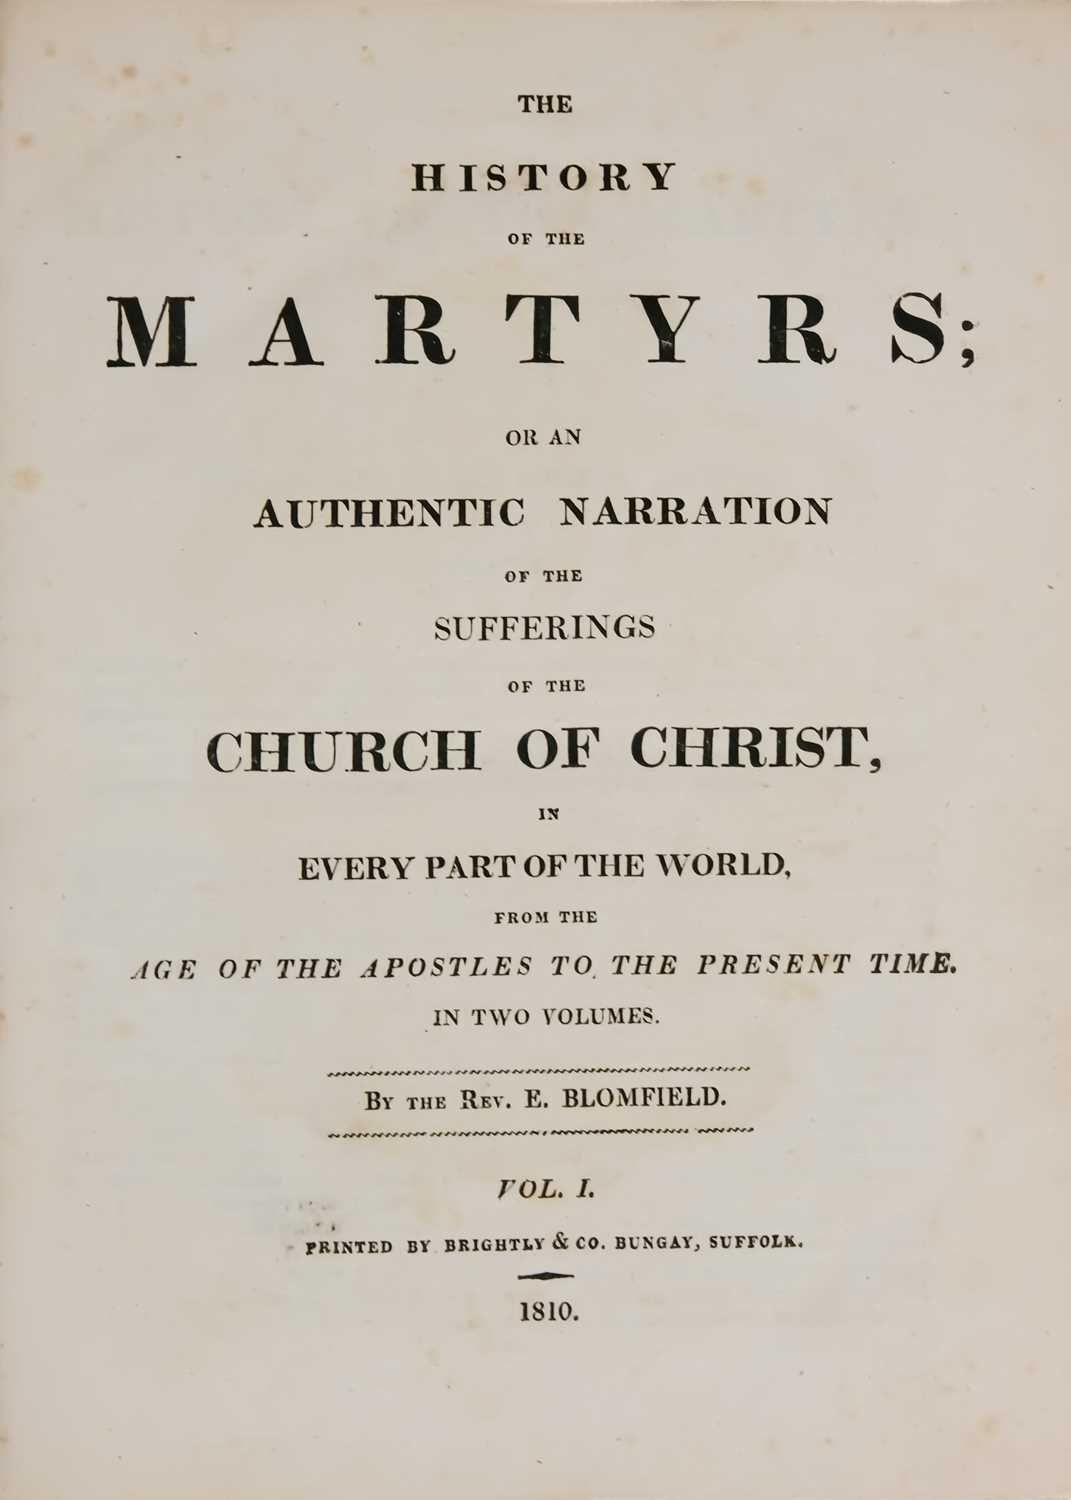 BLOMFIELD, The Rev. E. 'The History of the Martyrs; Or an Authentic Narration of the Sufferings of t - Image 4 of 6